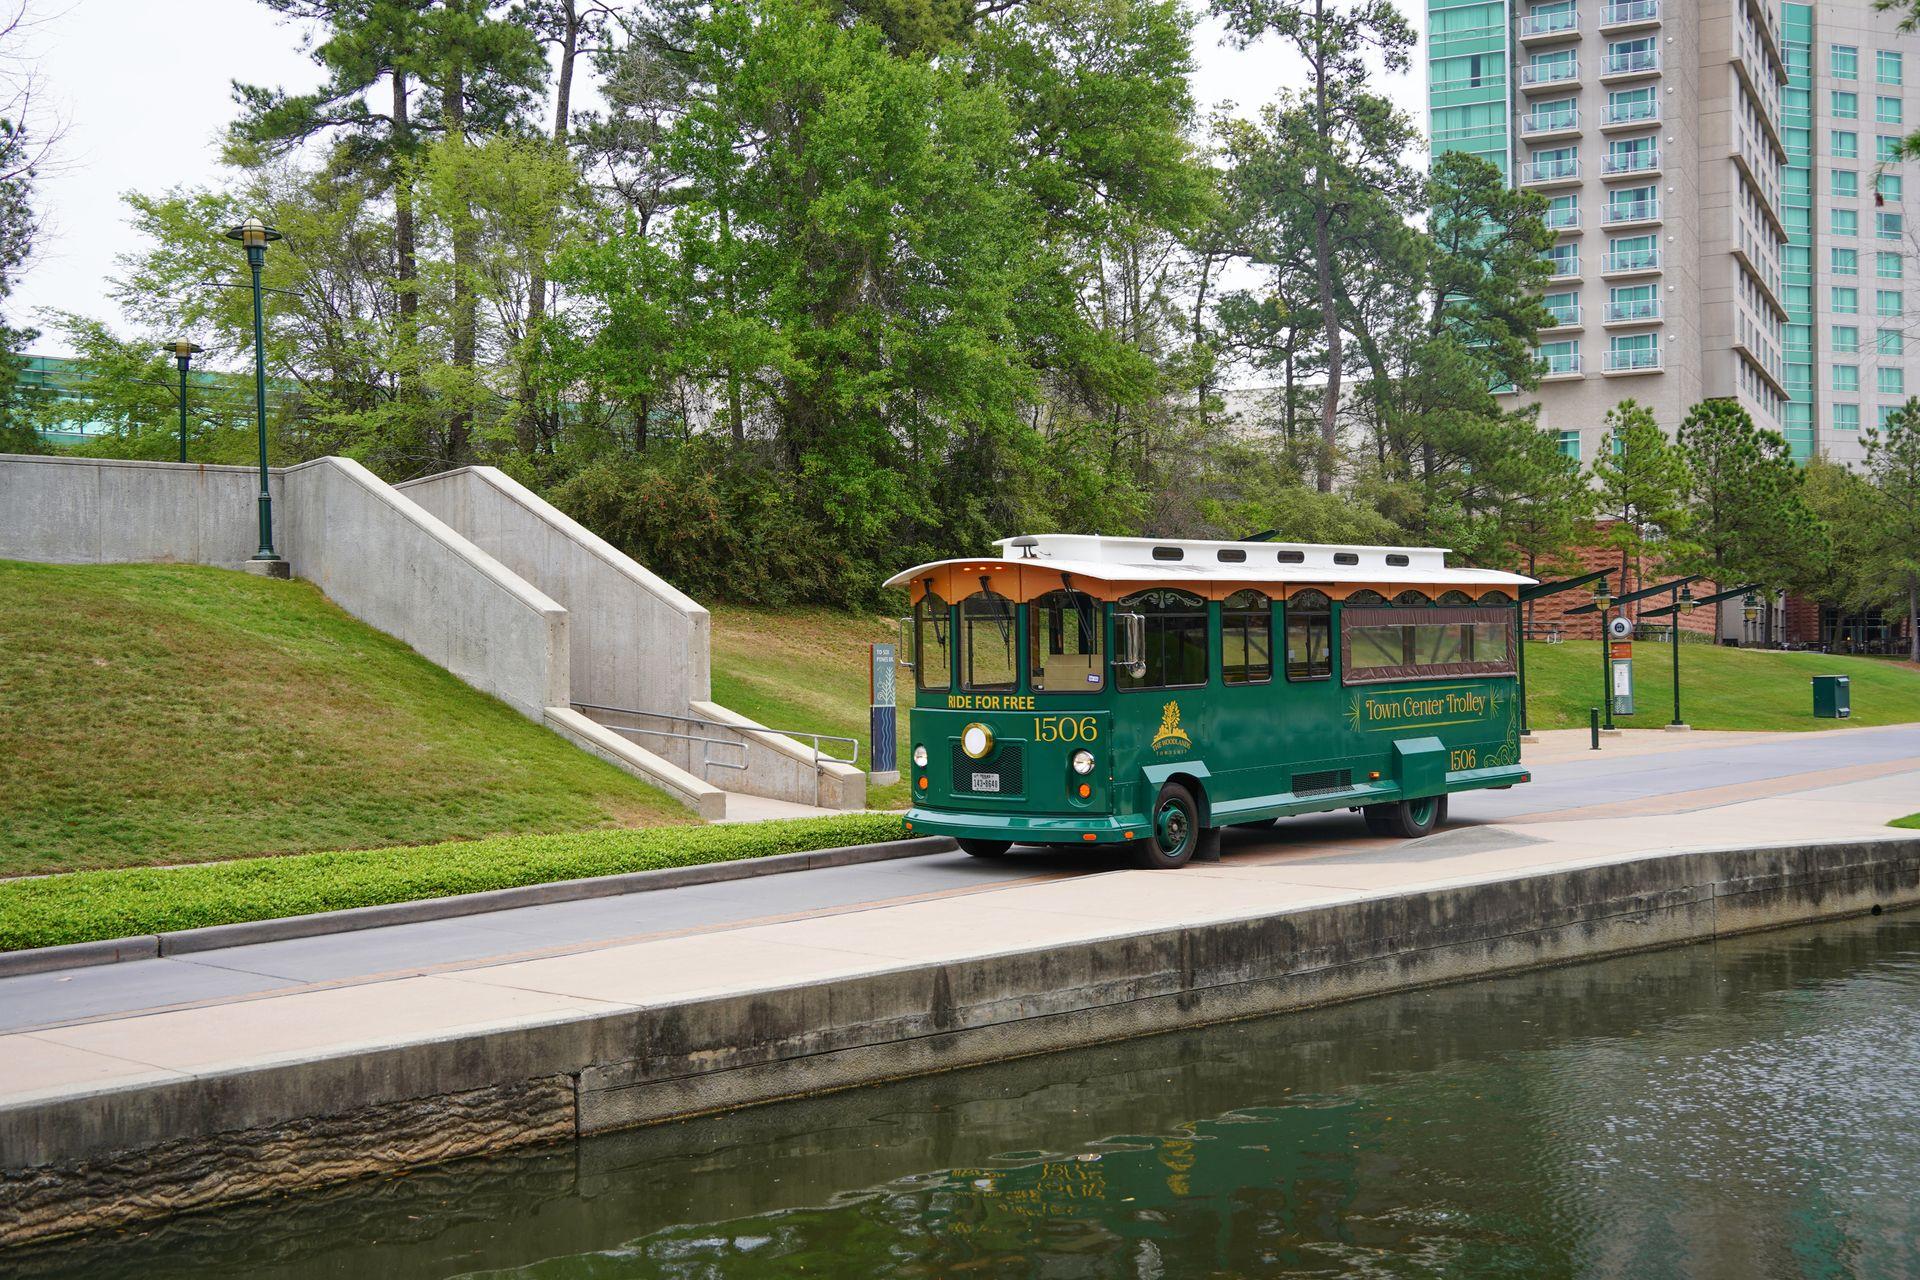 A green trolley driving along The Waterway in The Woodlands